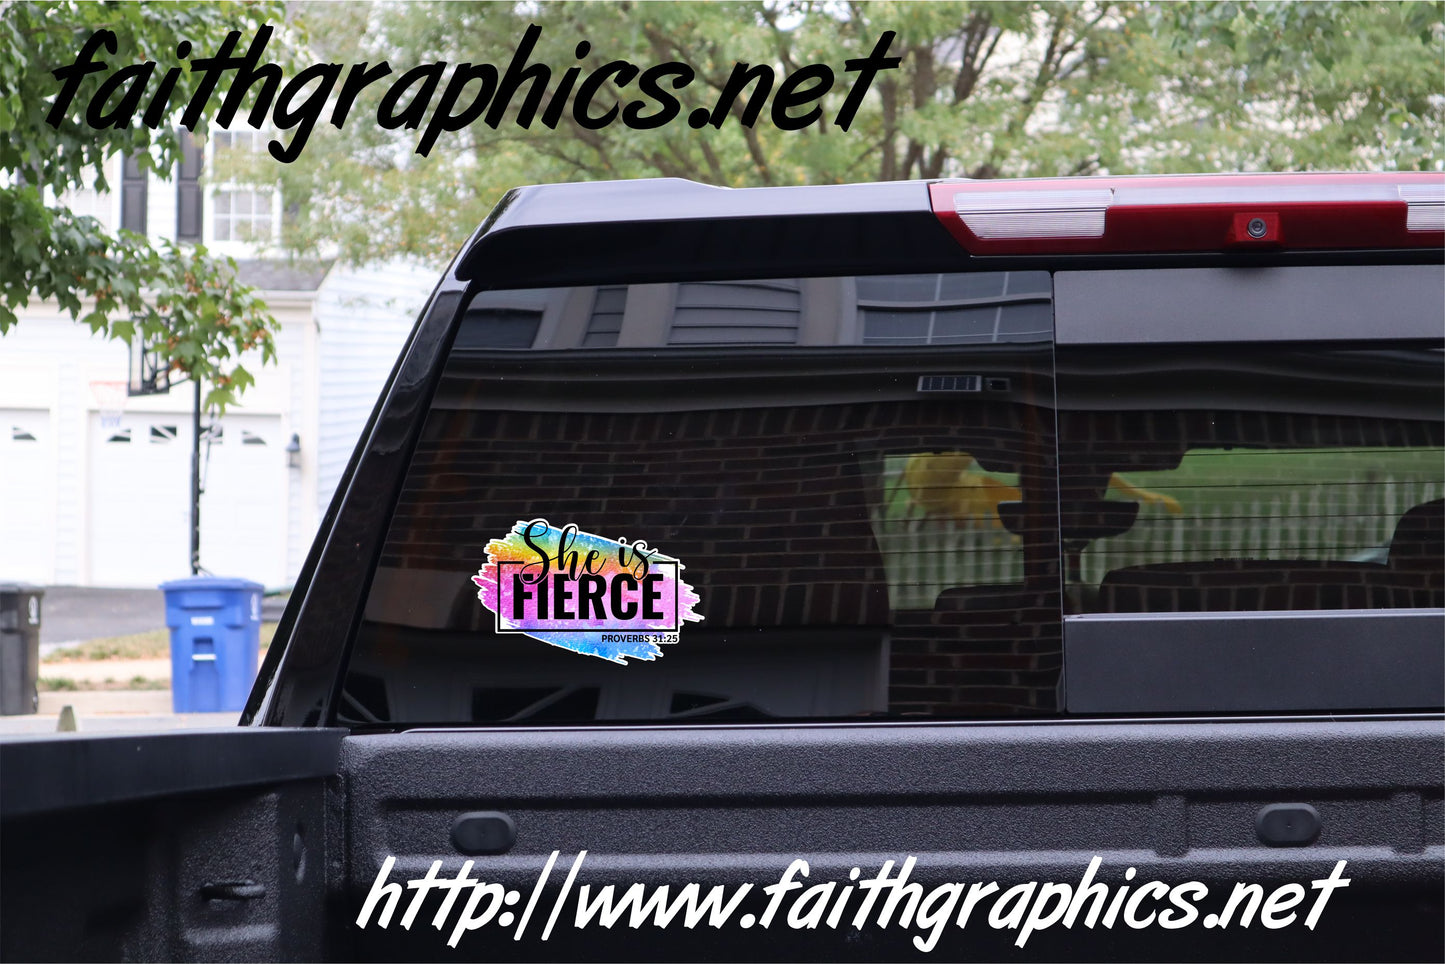 She is Fierce Proverbs 31.25 Decal